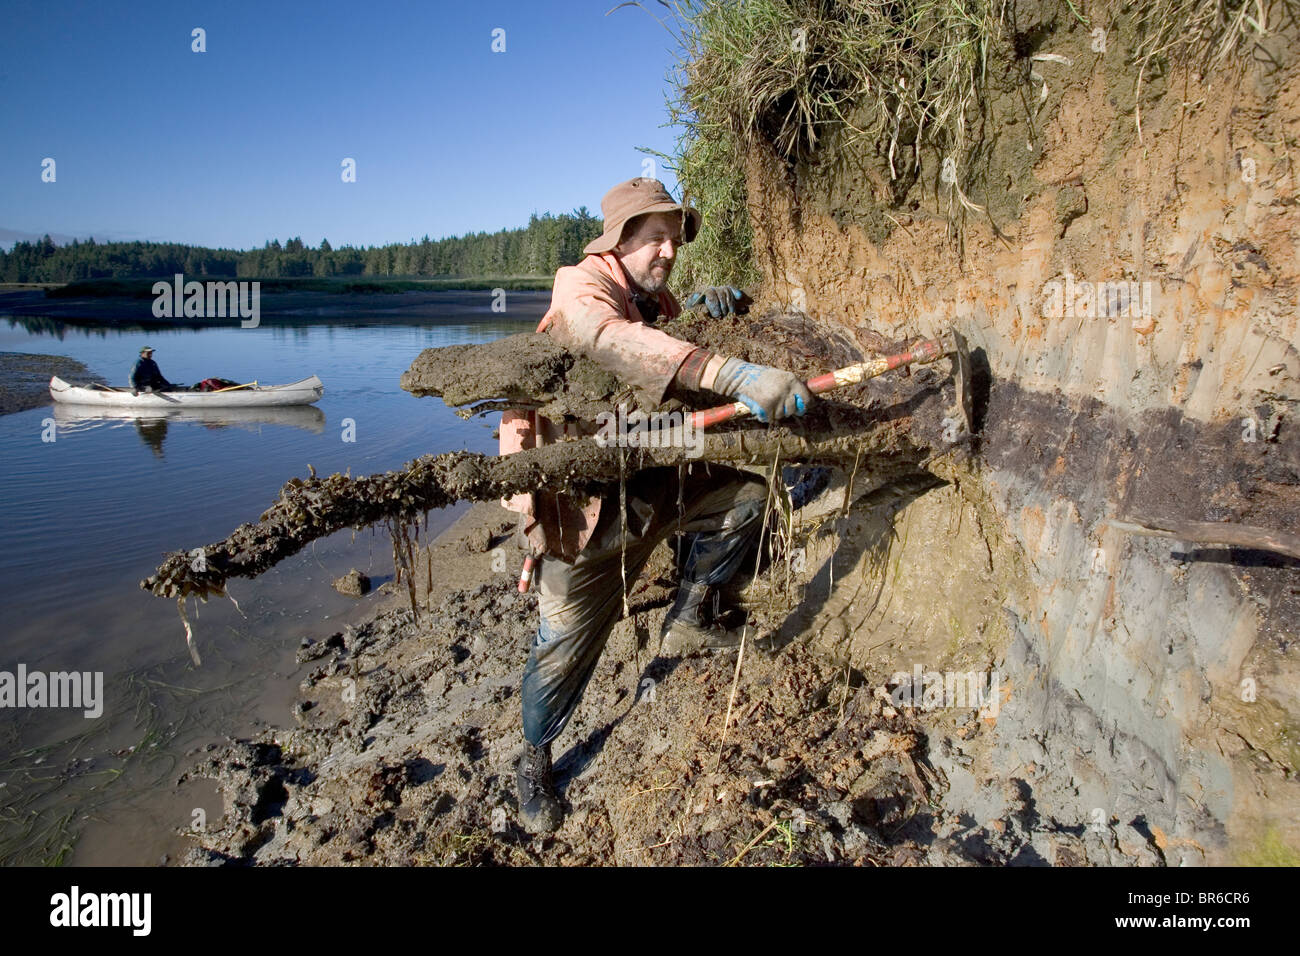 Geologist Brian Atwater cleans a mud bank at low tide on the Niawiakum River Washington as part of a Tsunami Research project. Stock Photo